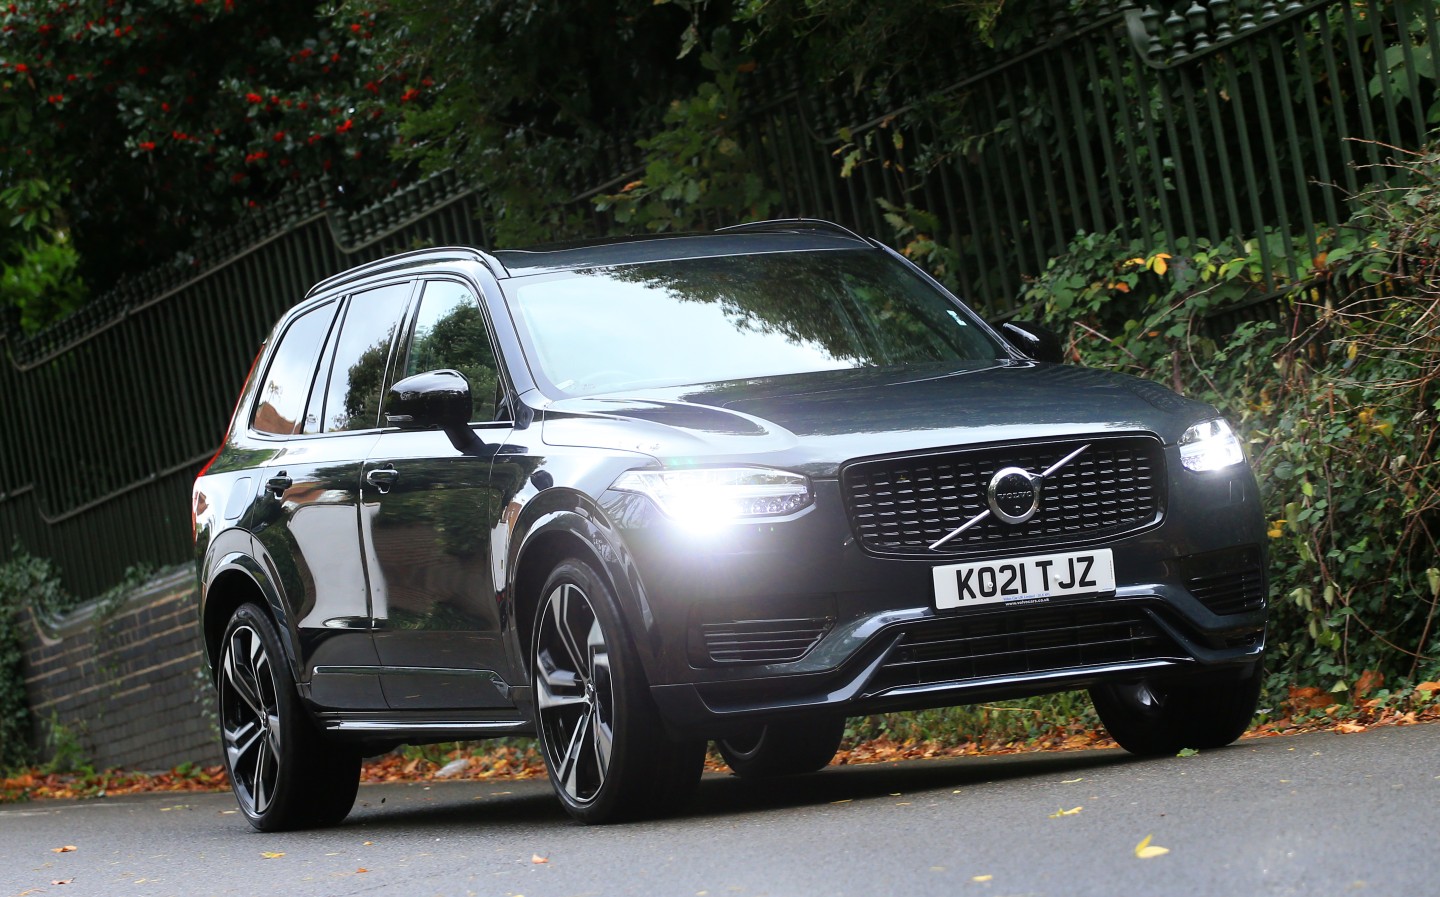 2021 Volvo XC90 Recharge long-term review by David Green for Sunday Times Driving.co.uk